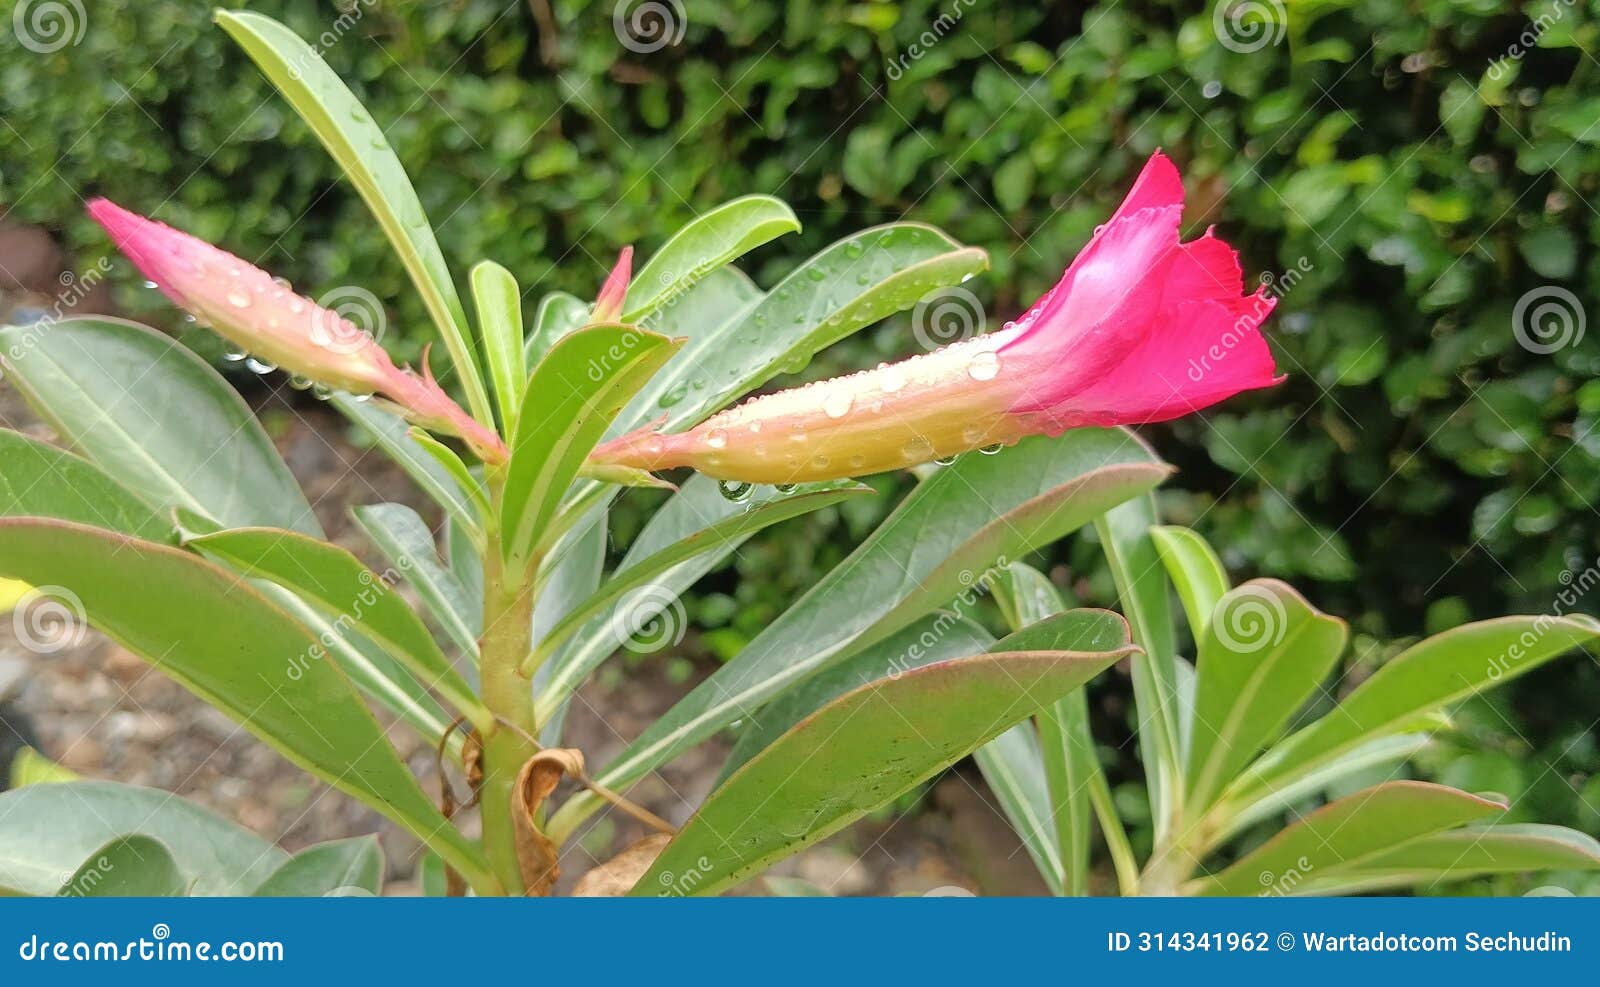 fresh red flower and green leaves natur